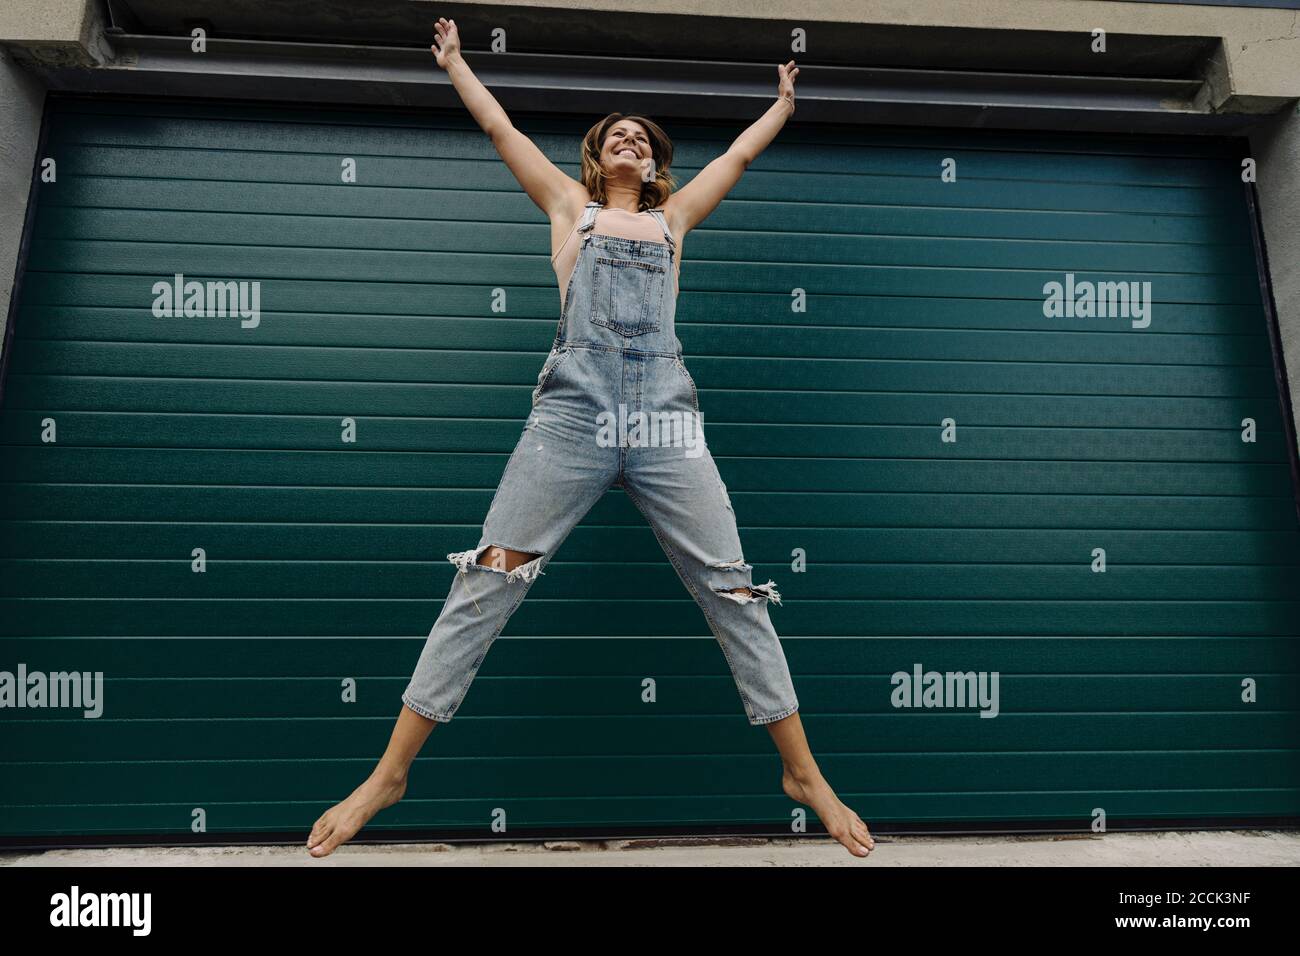 Carefree young woman jumping in front of garage door Stock Photo